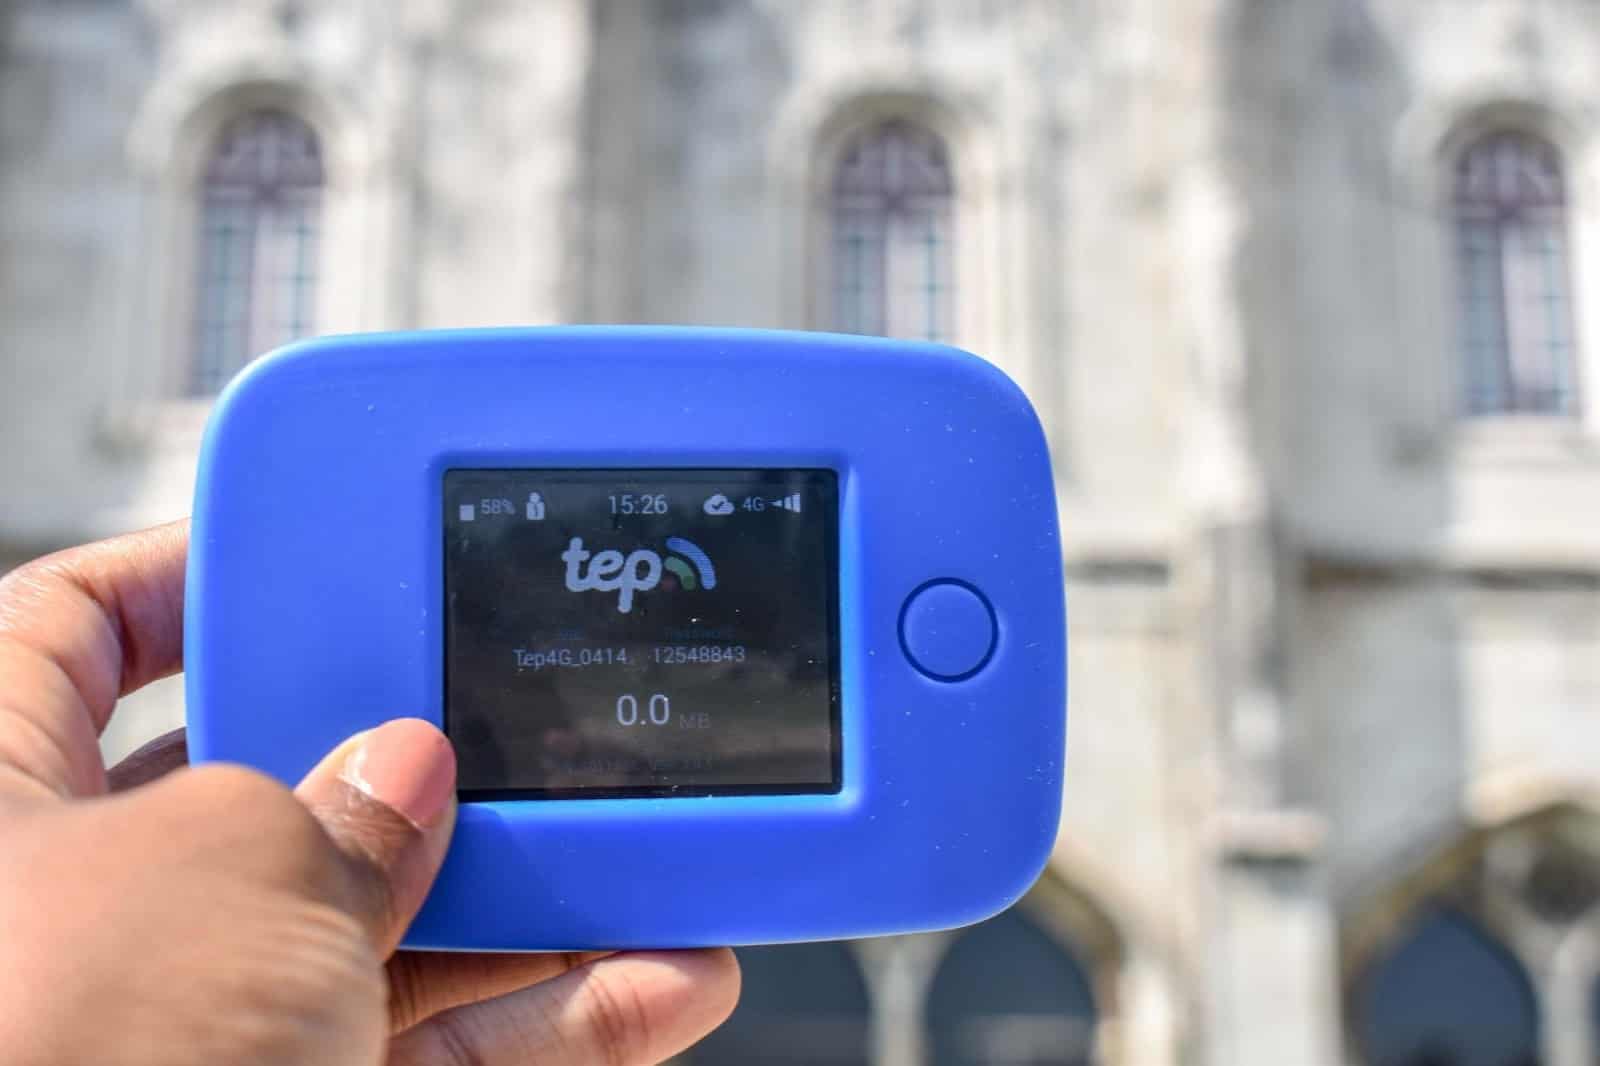 tep-wireless-is-a-device-creates-a-secure-wifi-hotspot-using-4g-lte-connectivity